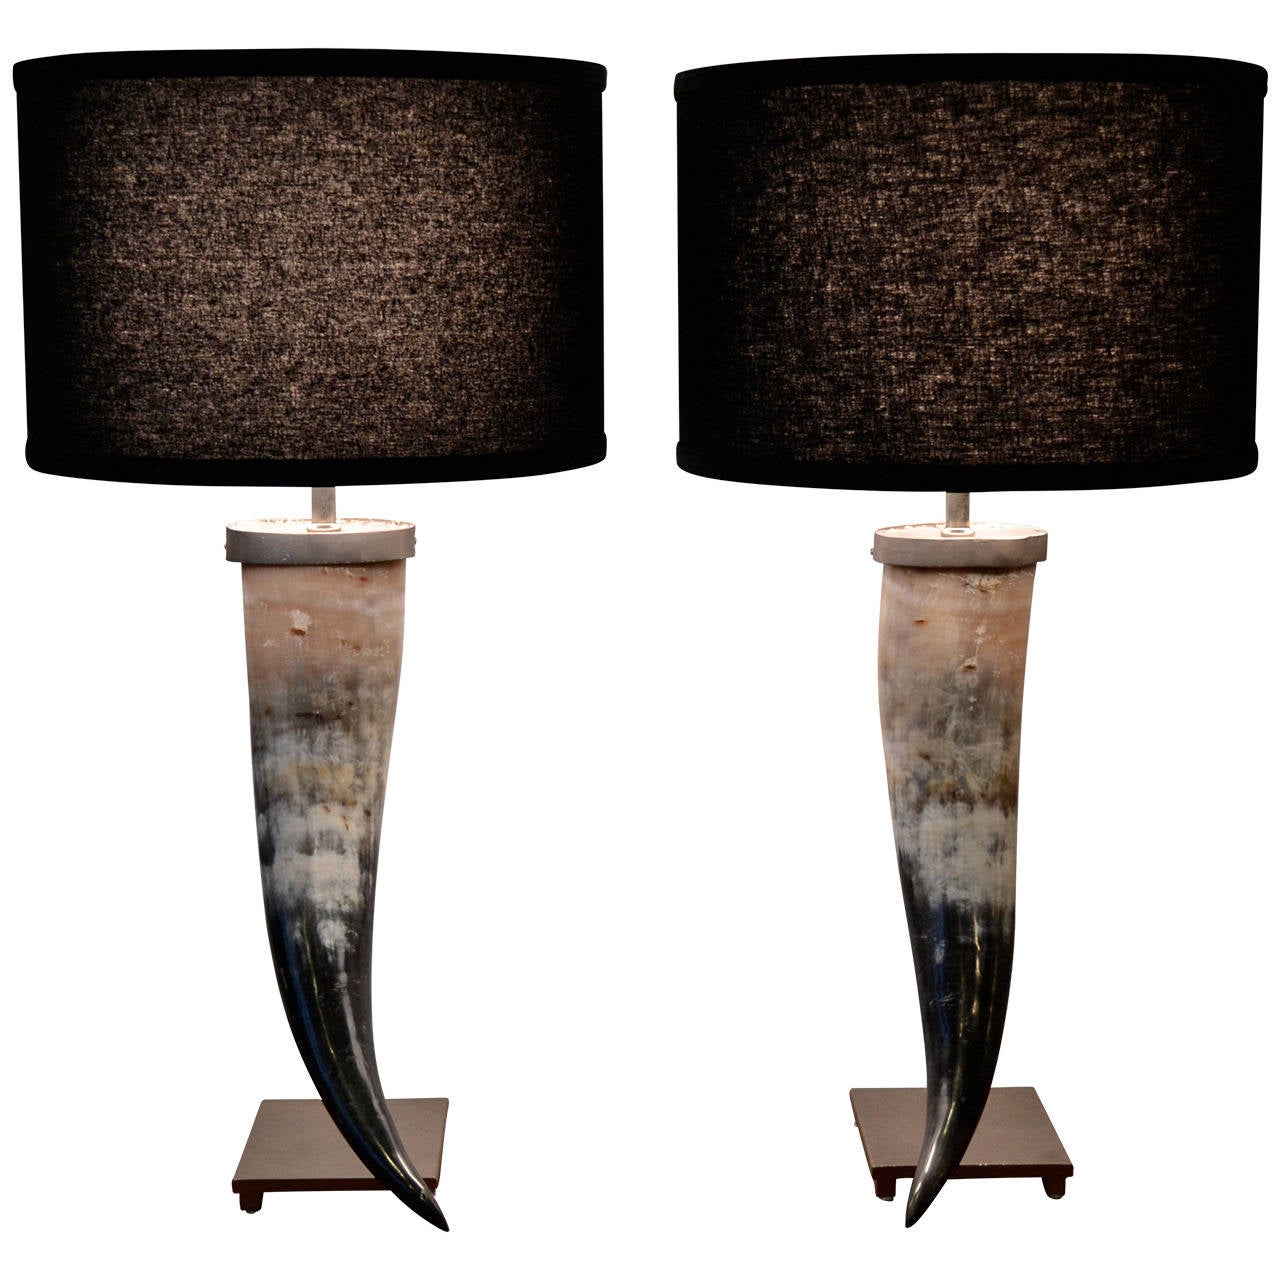 Rico Table Lamp with Metallic Color Shade Texas Longhorns Plate Rolled in on The lamp Base lamp Base Wrapped with Diamond Metal Plate 